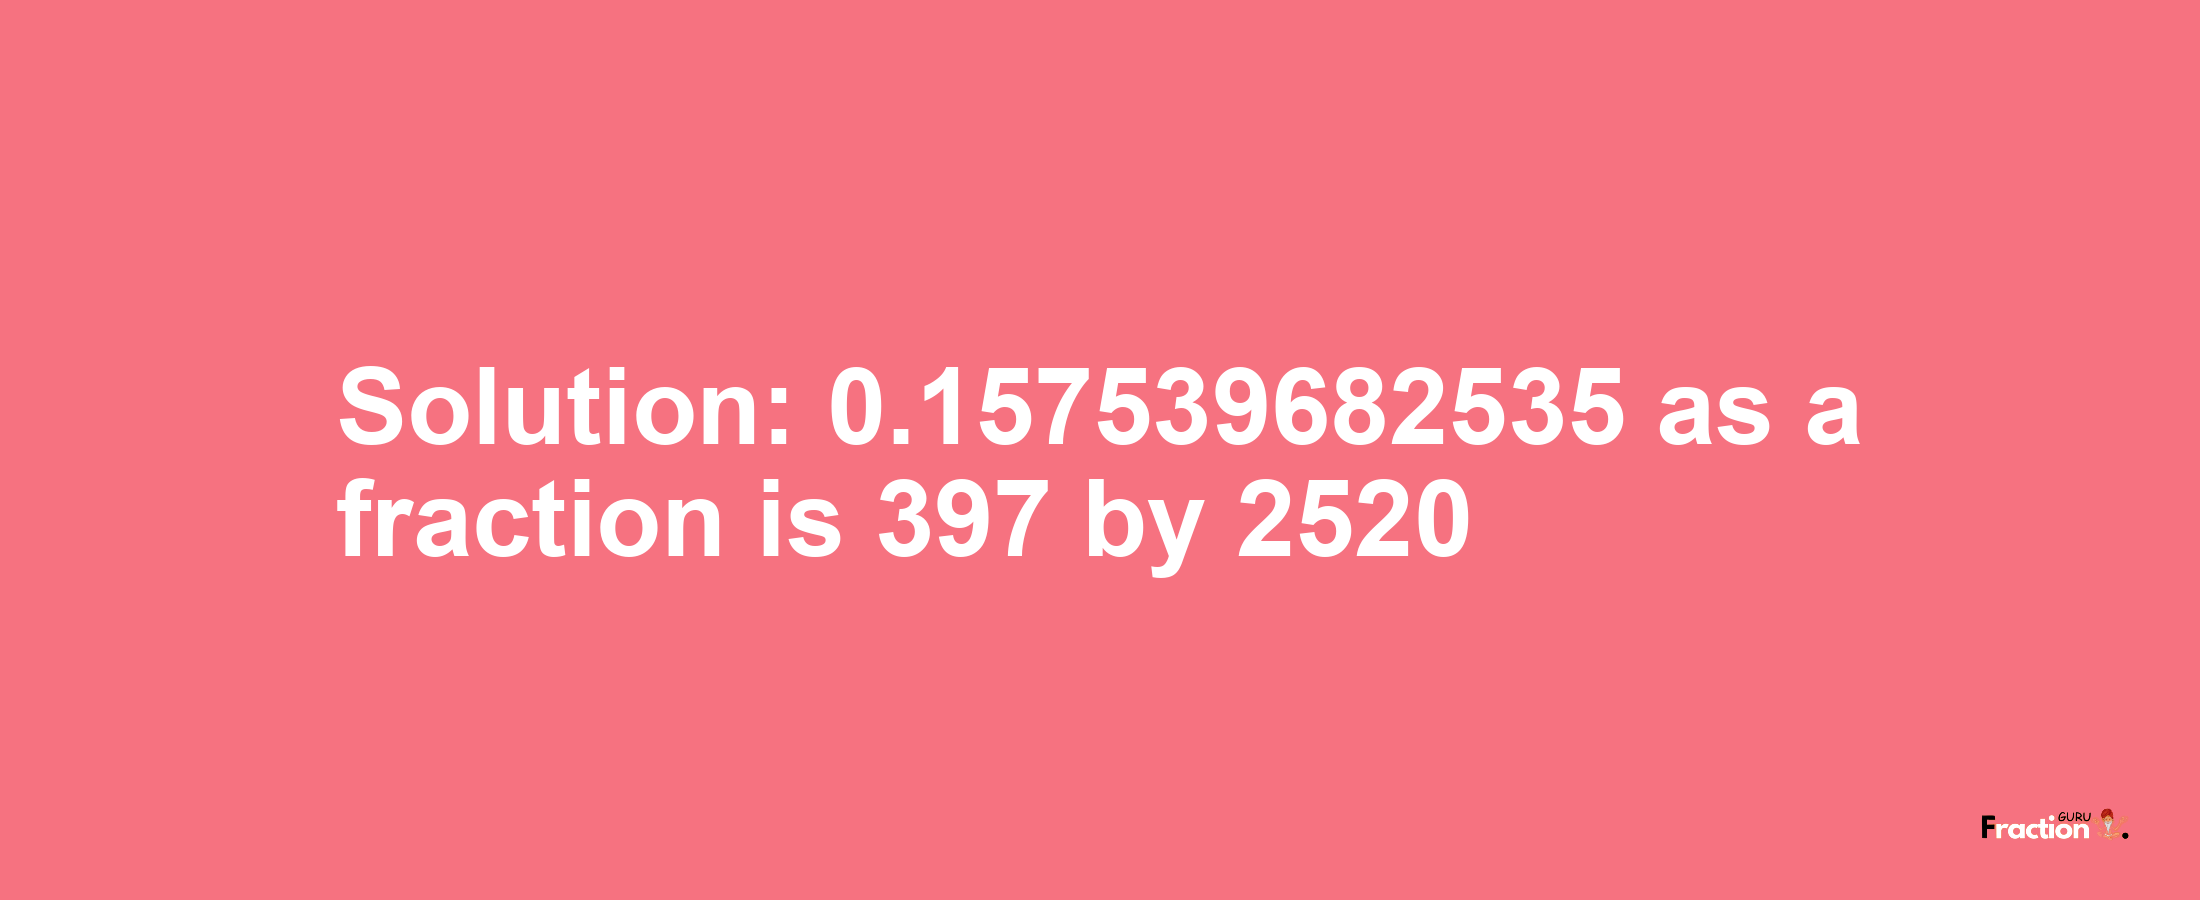 Solution:0.157539682535 as a fraction is 397/2520